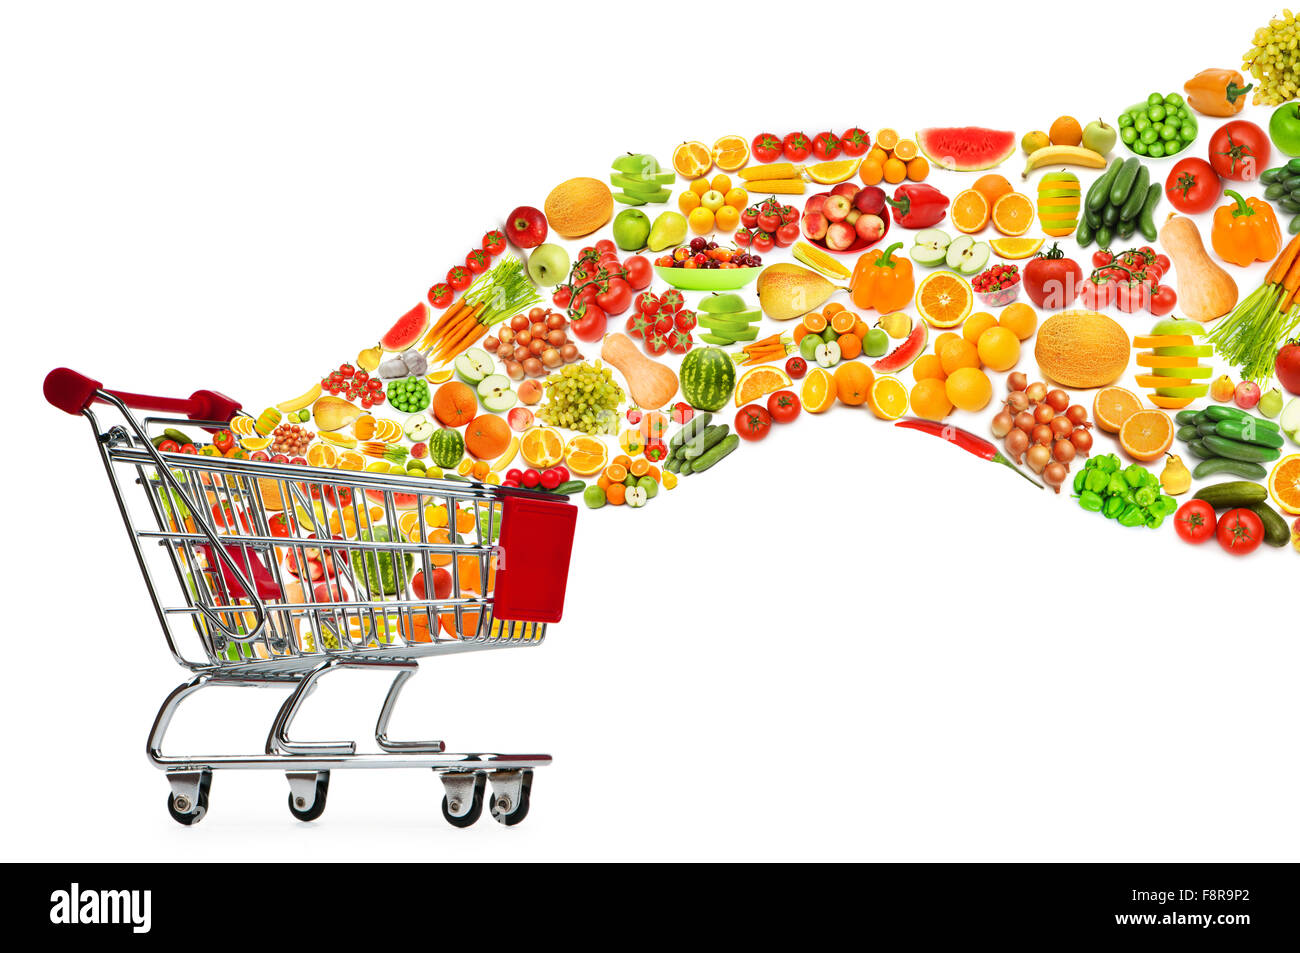 Food products flying out of shopping cart Stock Photo